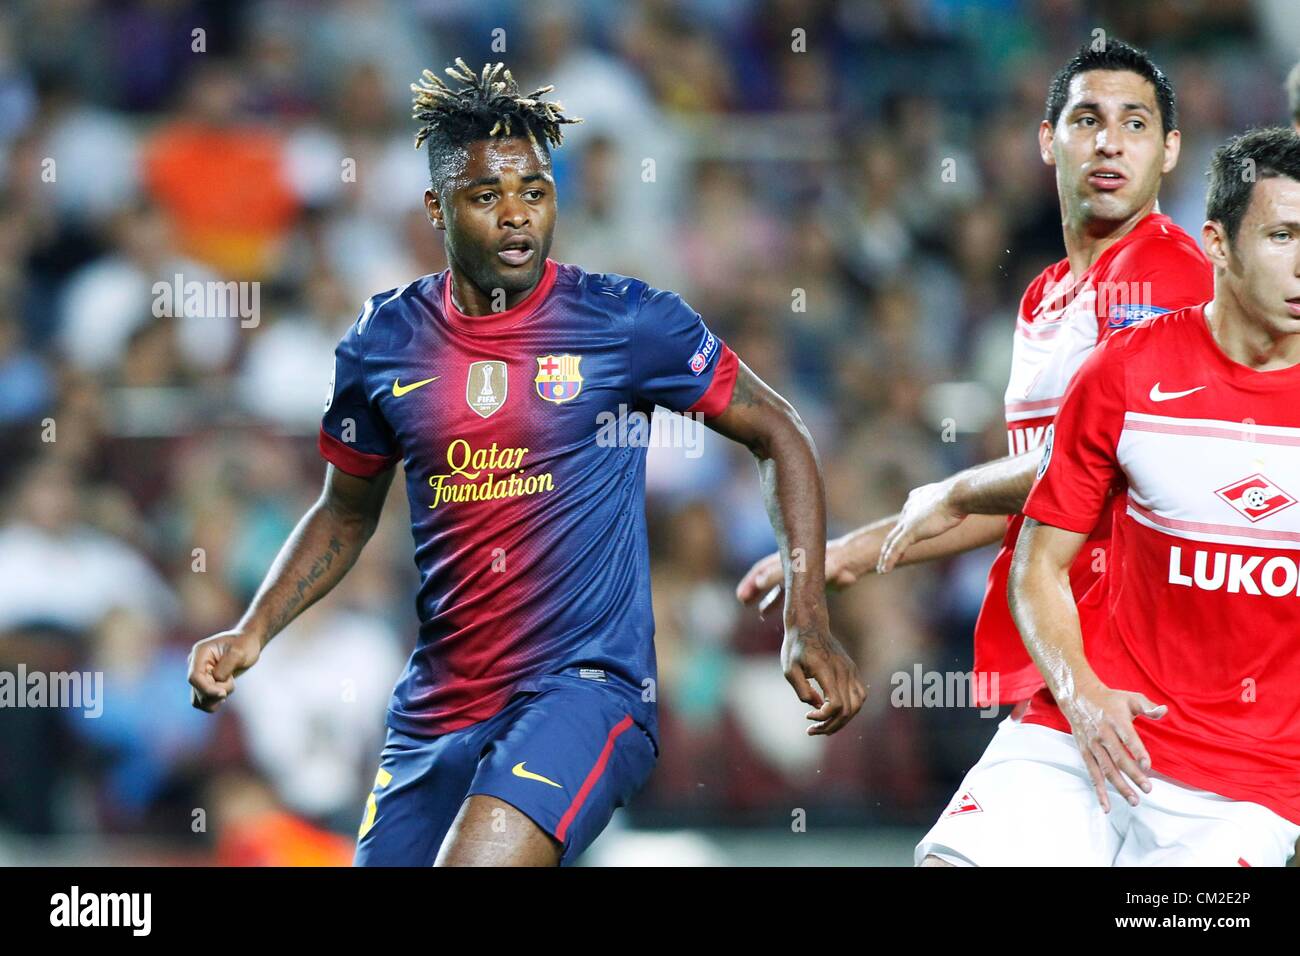 Alex Song (Barcelona), SEPTEMBER 19, 2012 - Football / Soccer : UEFA Champions League Group G match between FC Barcelona 3-2 FC Spartak Moskva at Camp Nou stadium in Barcelona, Spain. (Photo by D.Nakashima/AFLO) [2336] Stock Photo